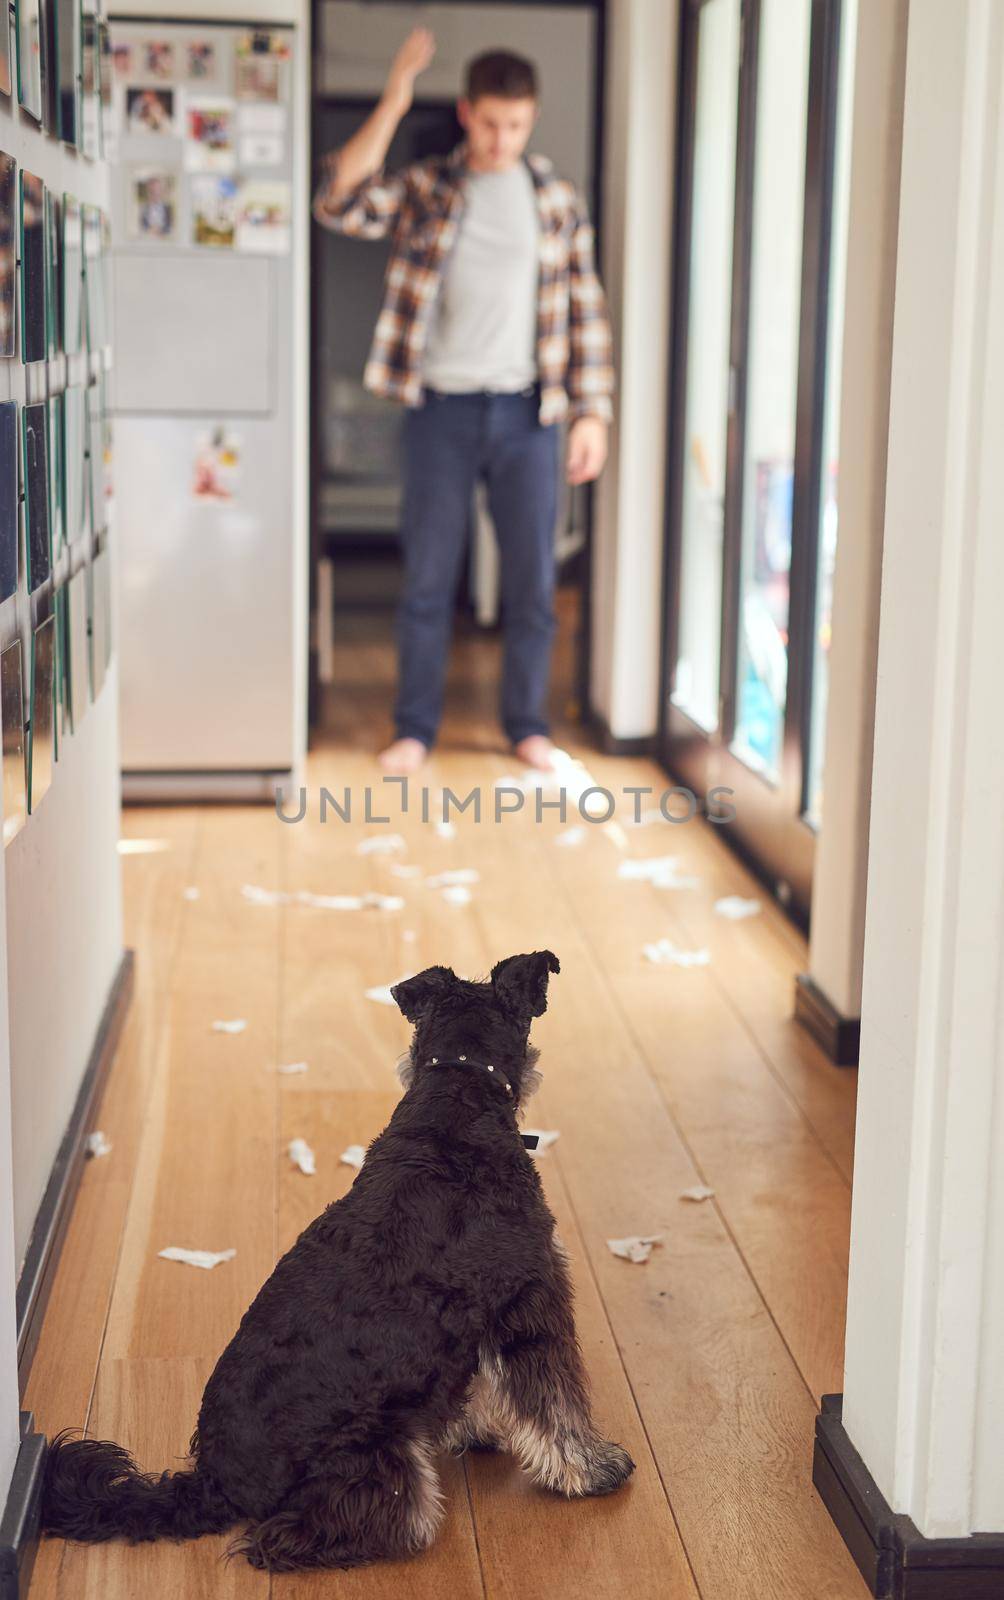 Too bad for him. Great for a meme, though. Shot of a man looking at the mess his dog made in the house. by YuriArcurs